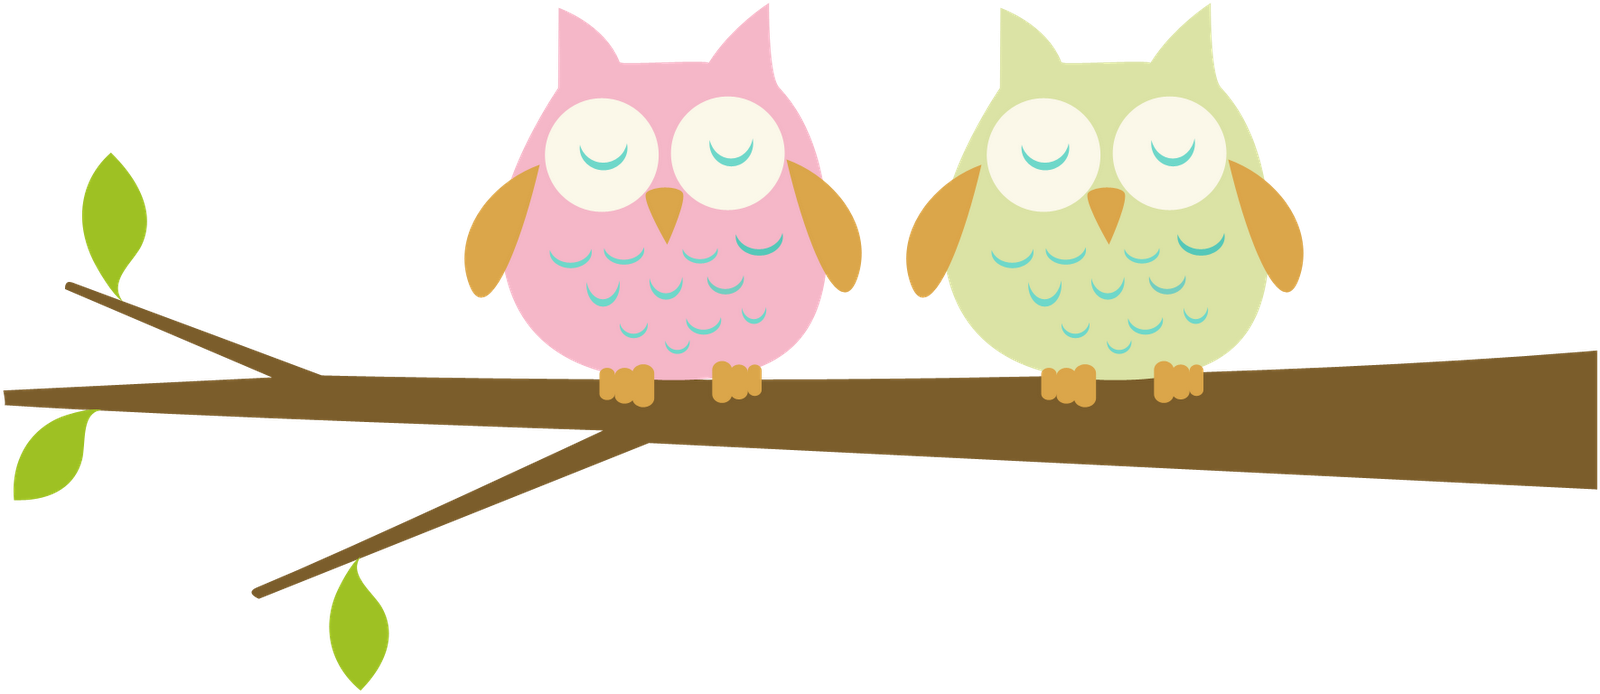 Free Baby Owl Clipart, Download Free Clip Art, Free Clip Art